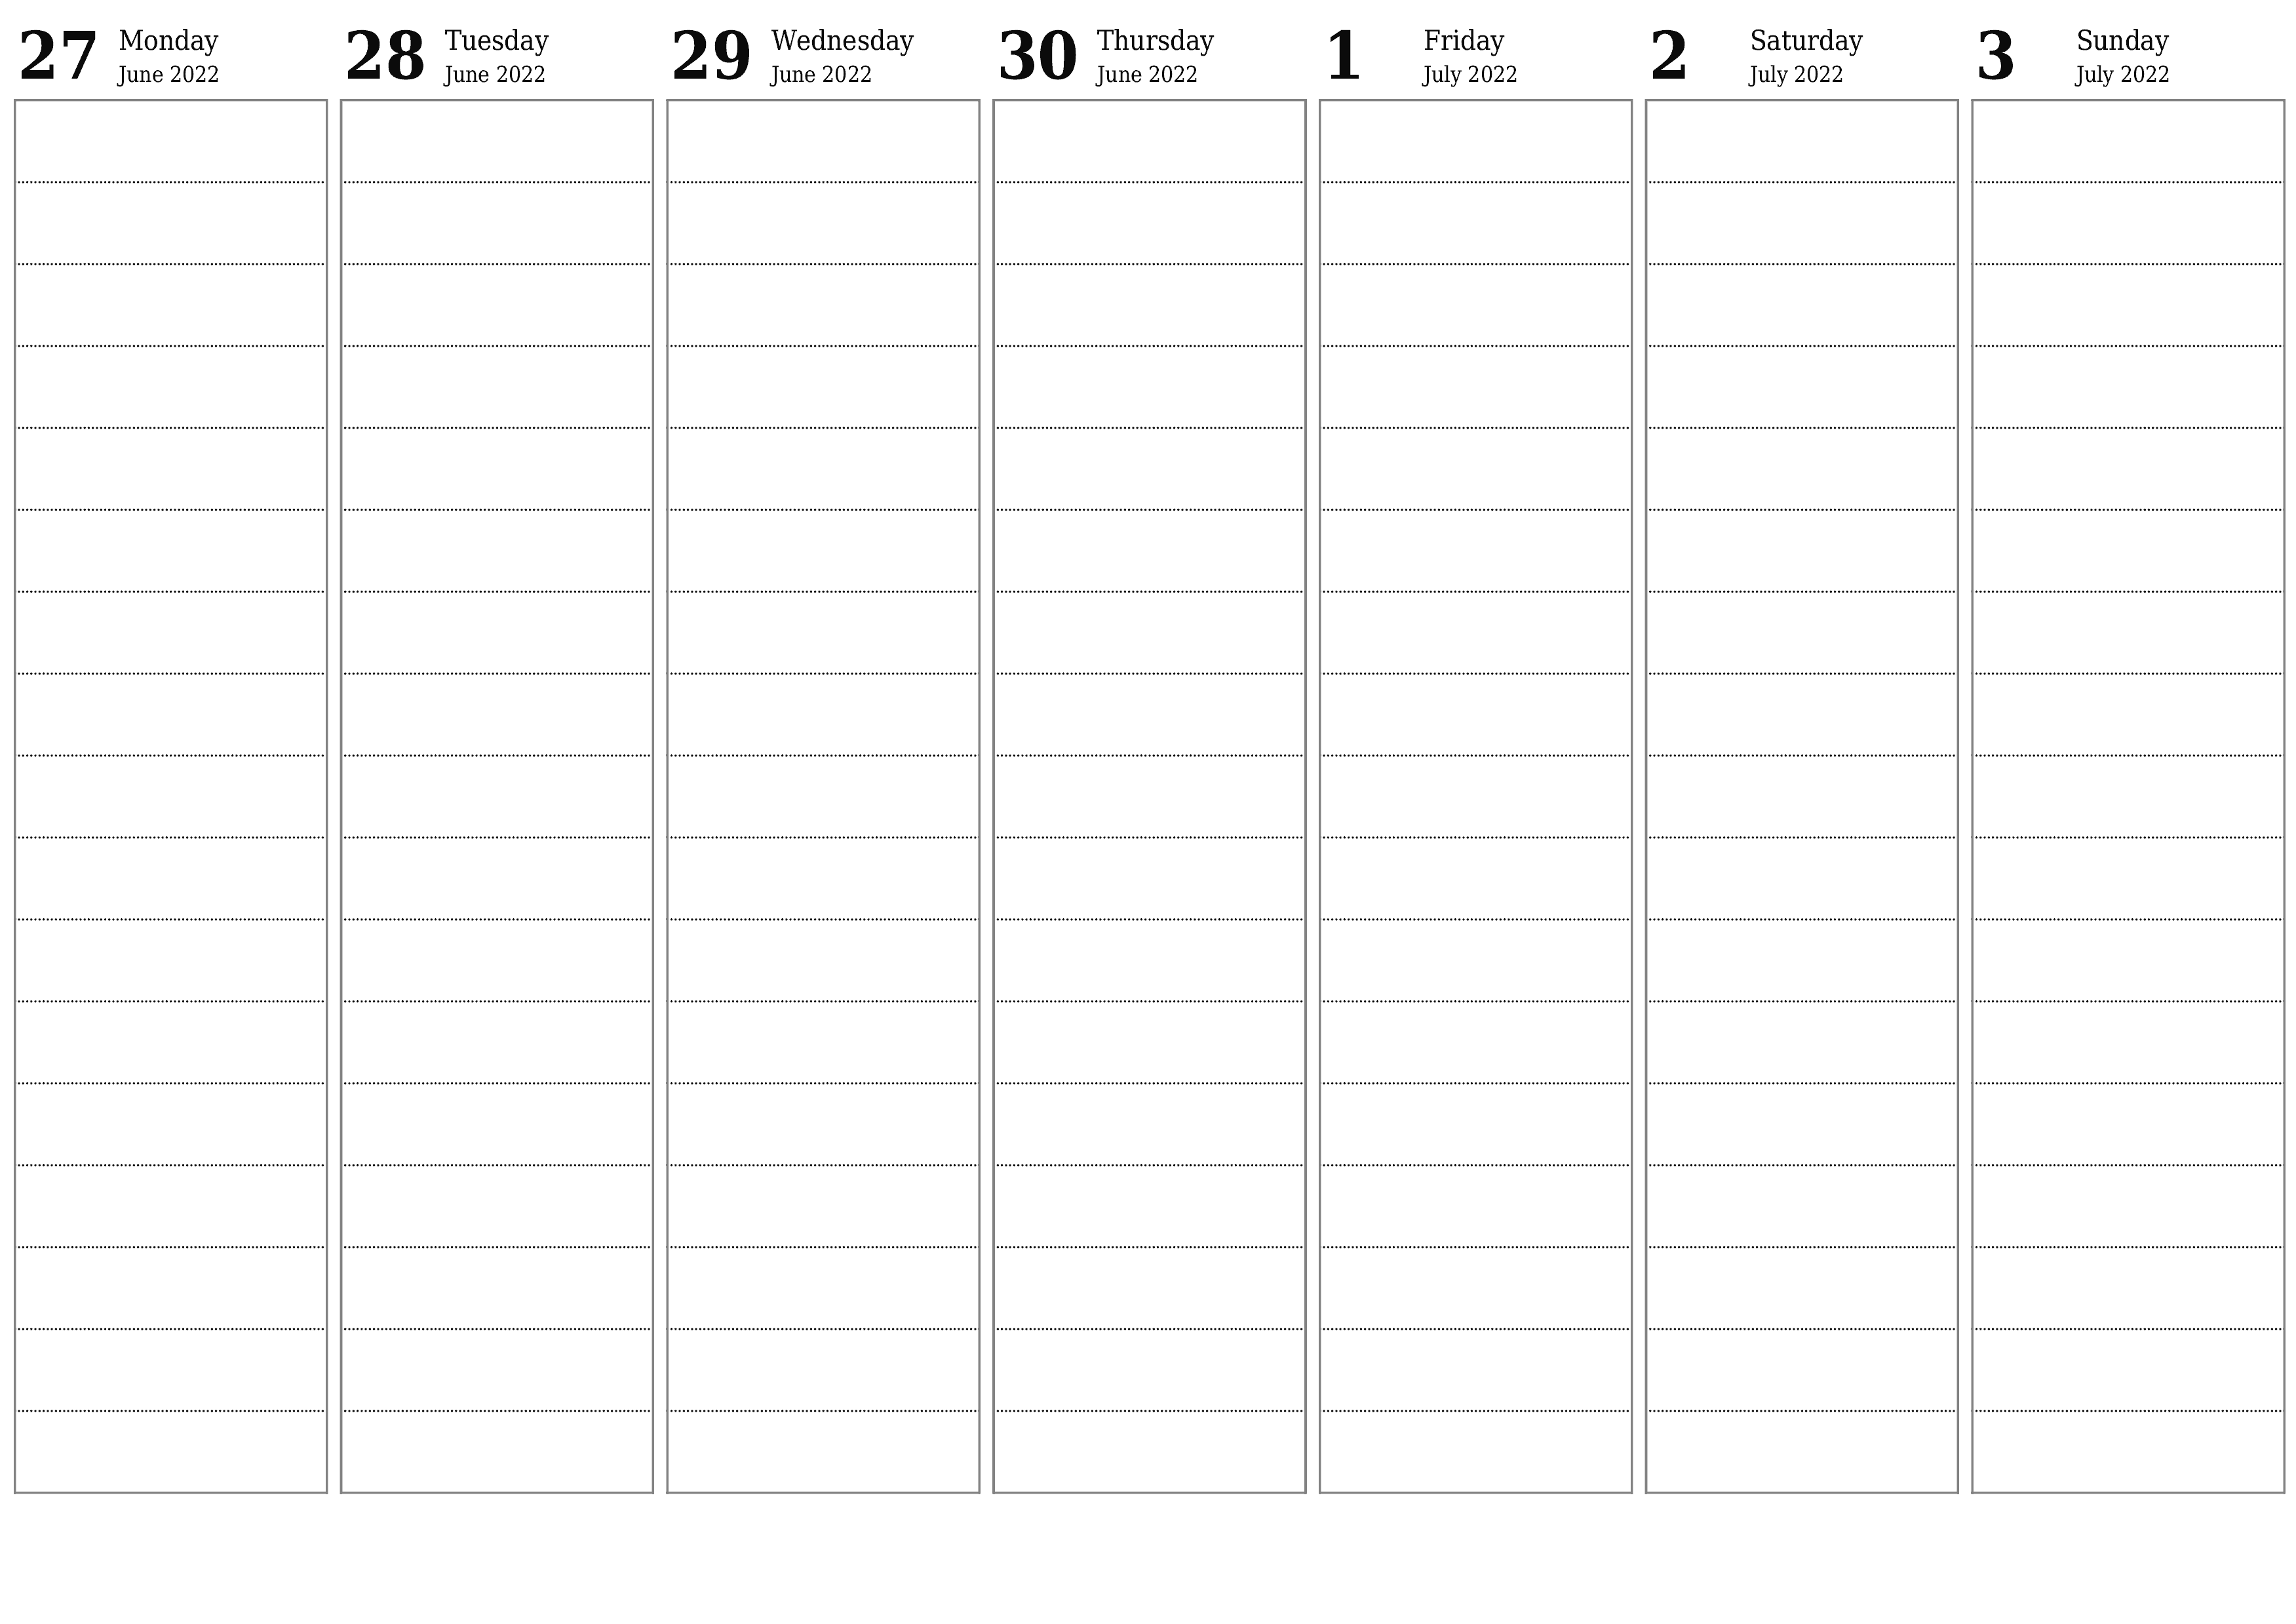 Blank weekly dated HD template image of calendar for week July 2022 save and print to PDF PNG English - 7calendar.com